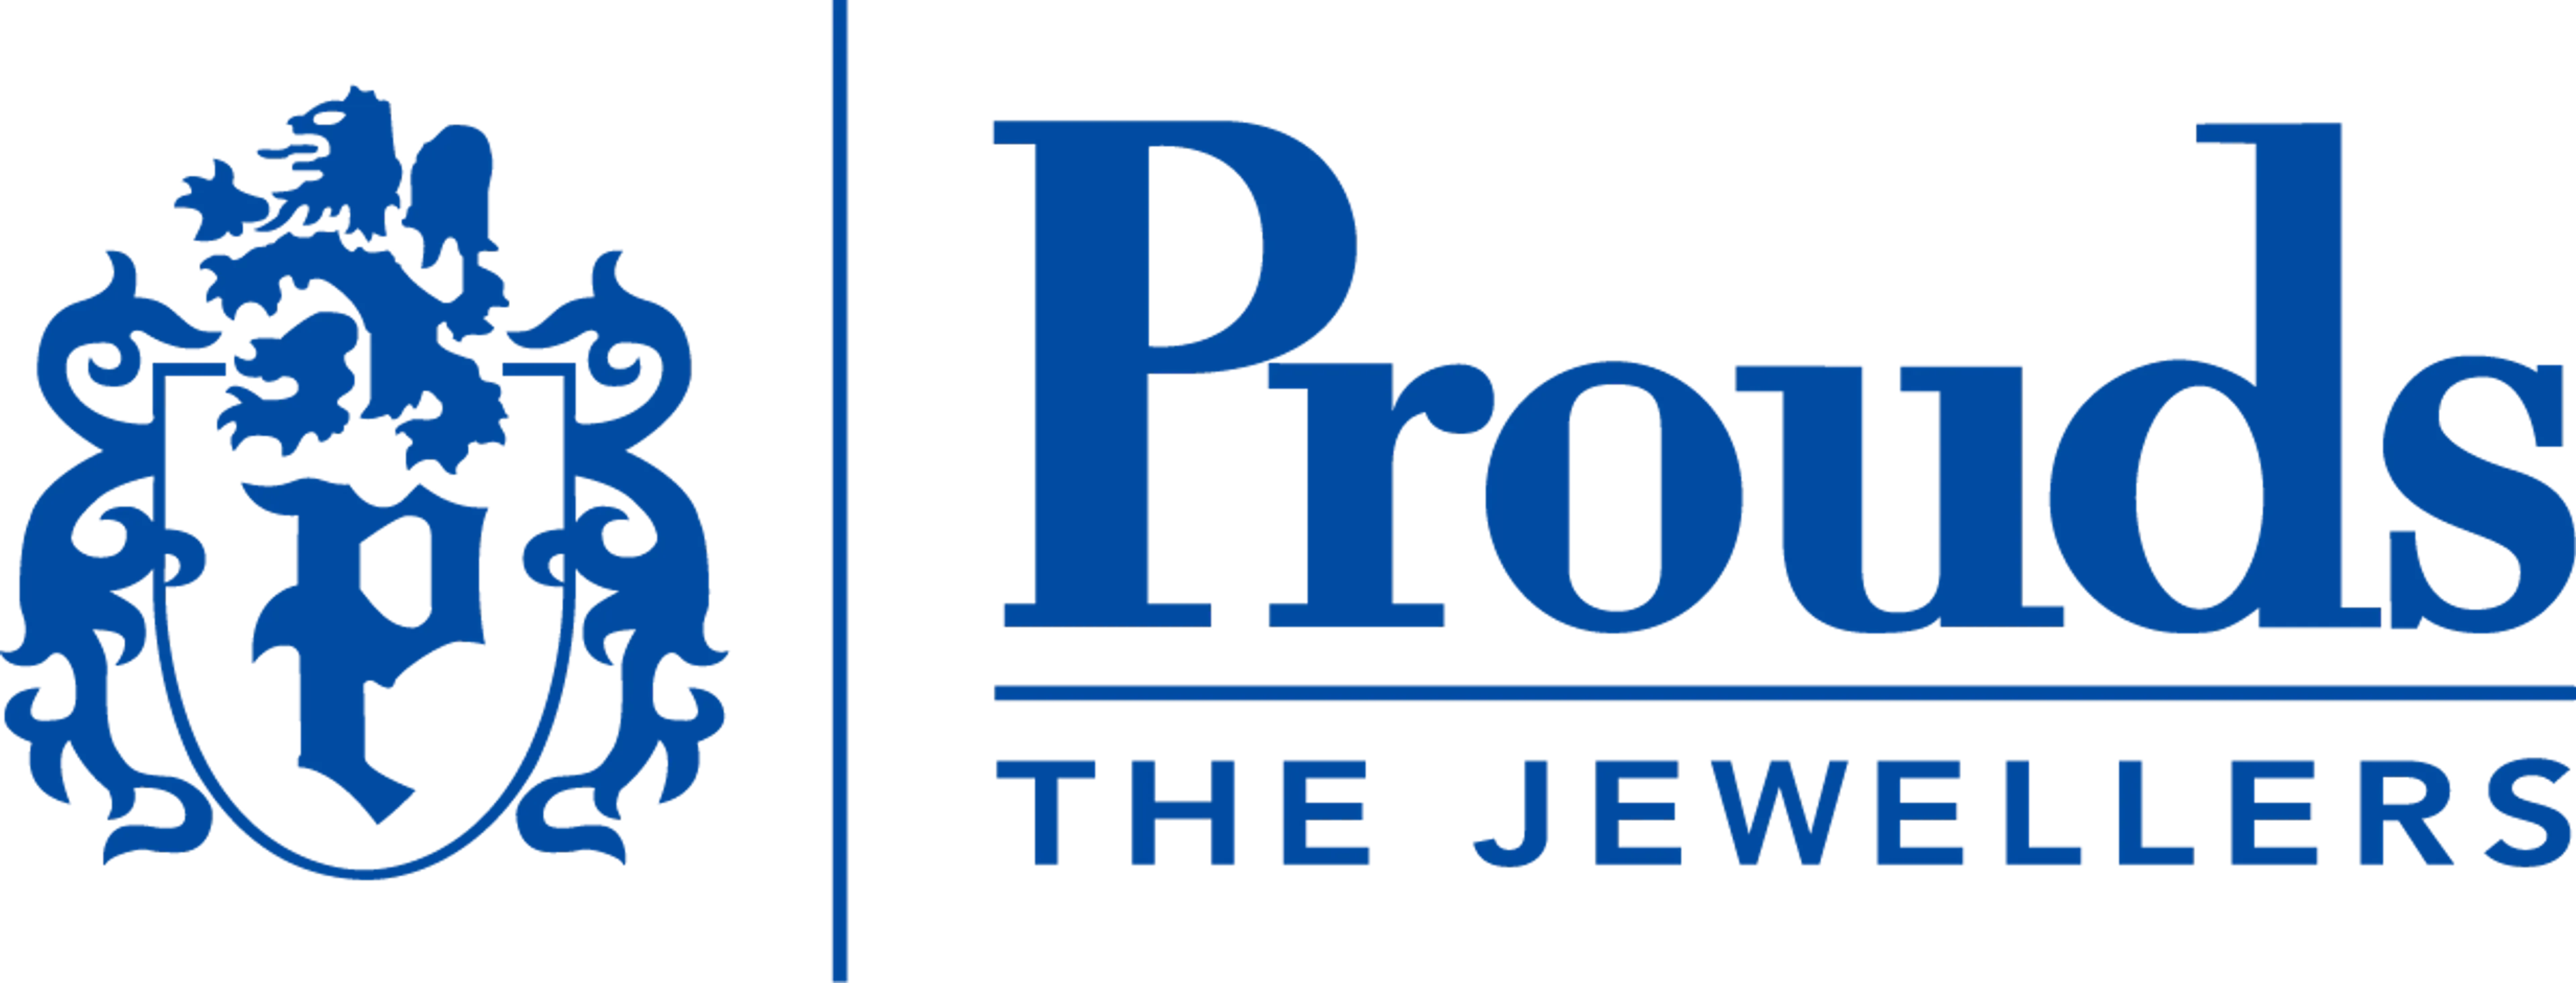 PROUDS THE JEWELLERS logo